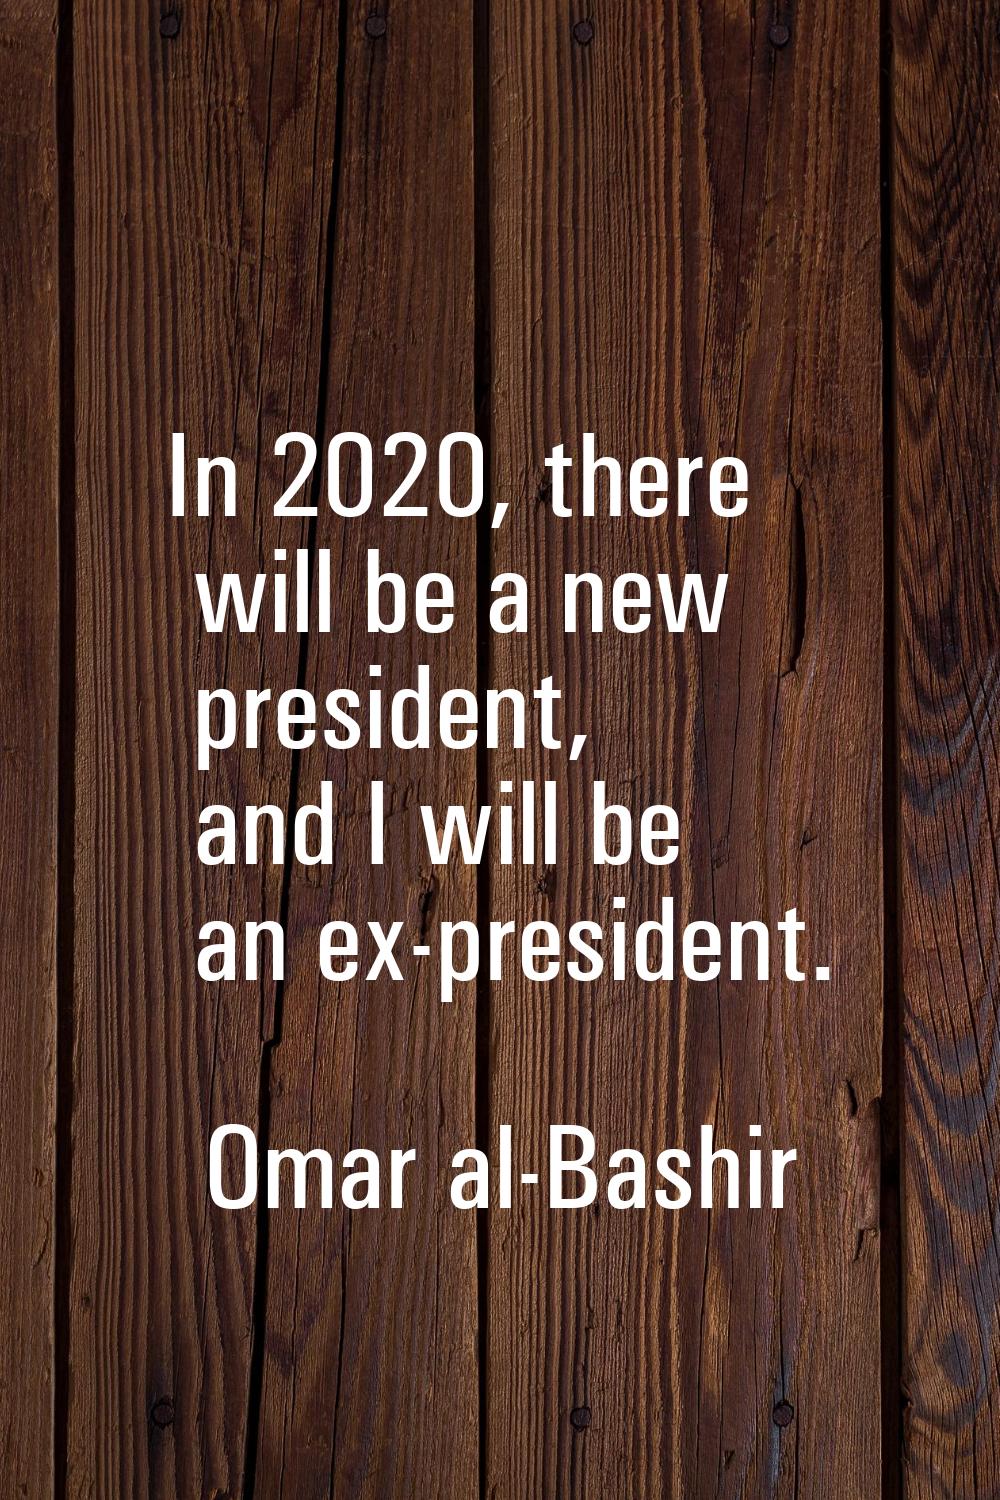 In 2020, there will be a new president, and I will be an ex-president.